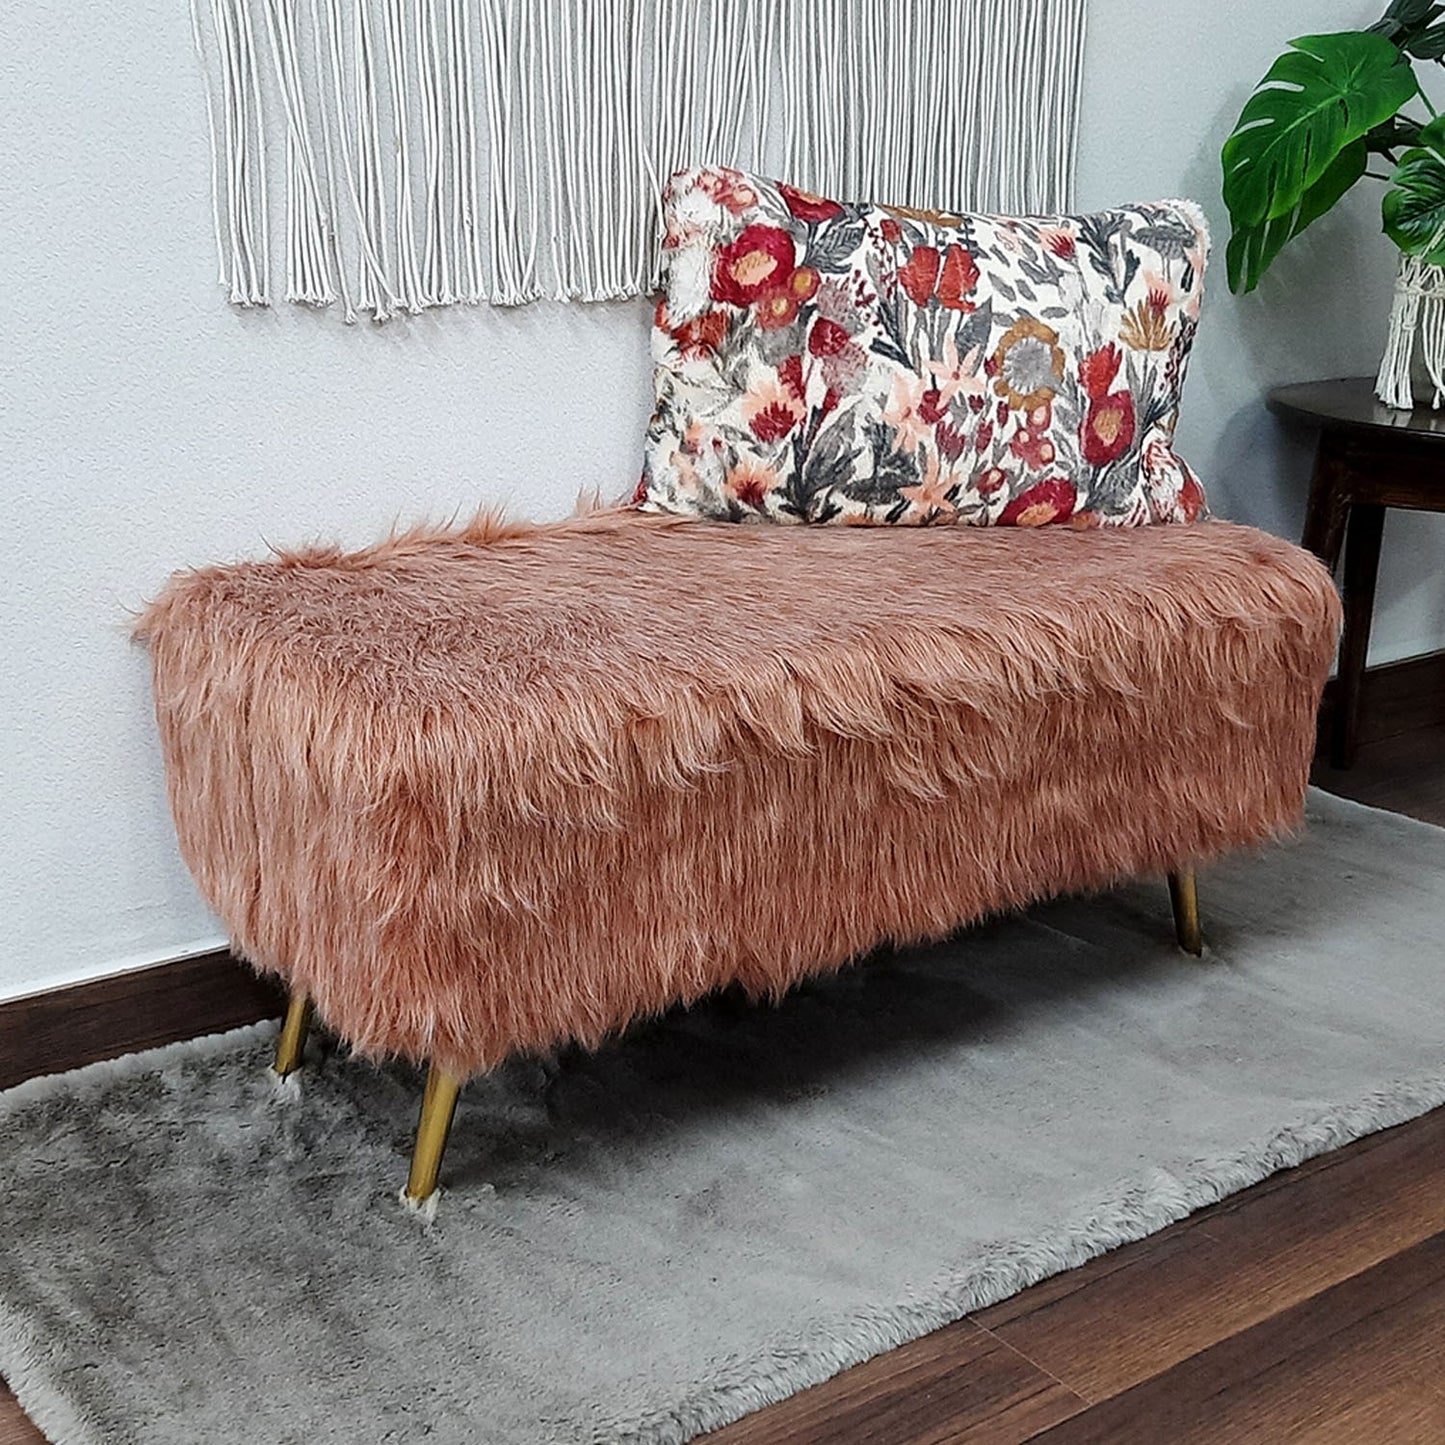 Noviato Collection – Light Redwood Premium Double Shade Long Faux Fur Bench Gold Metal Legs Modern On-Trend Style Multi-Functional Ottoman Bench Seat, 90 cm length | from Avioni